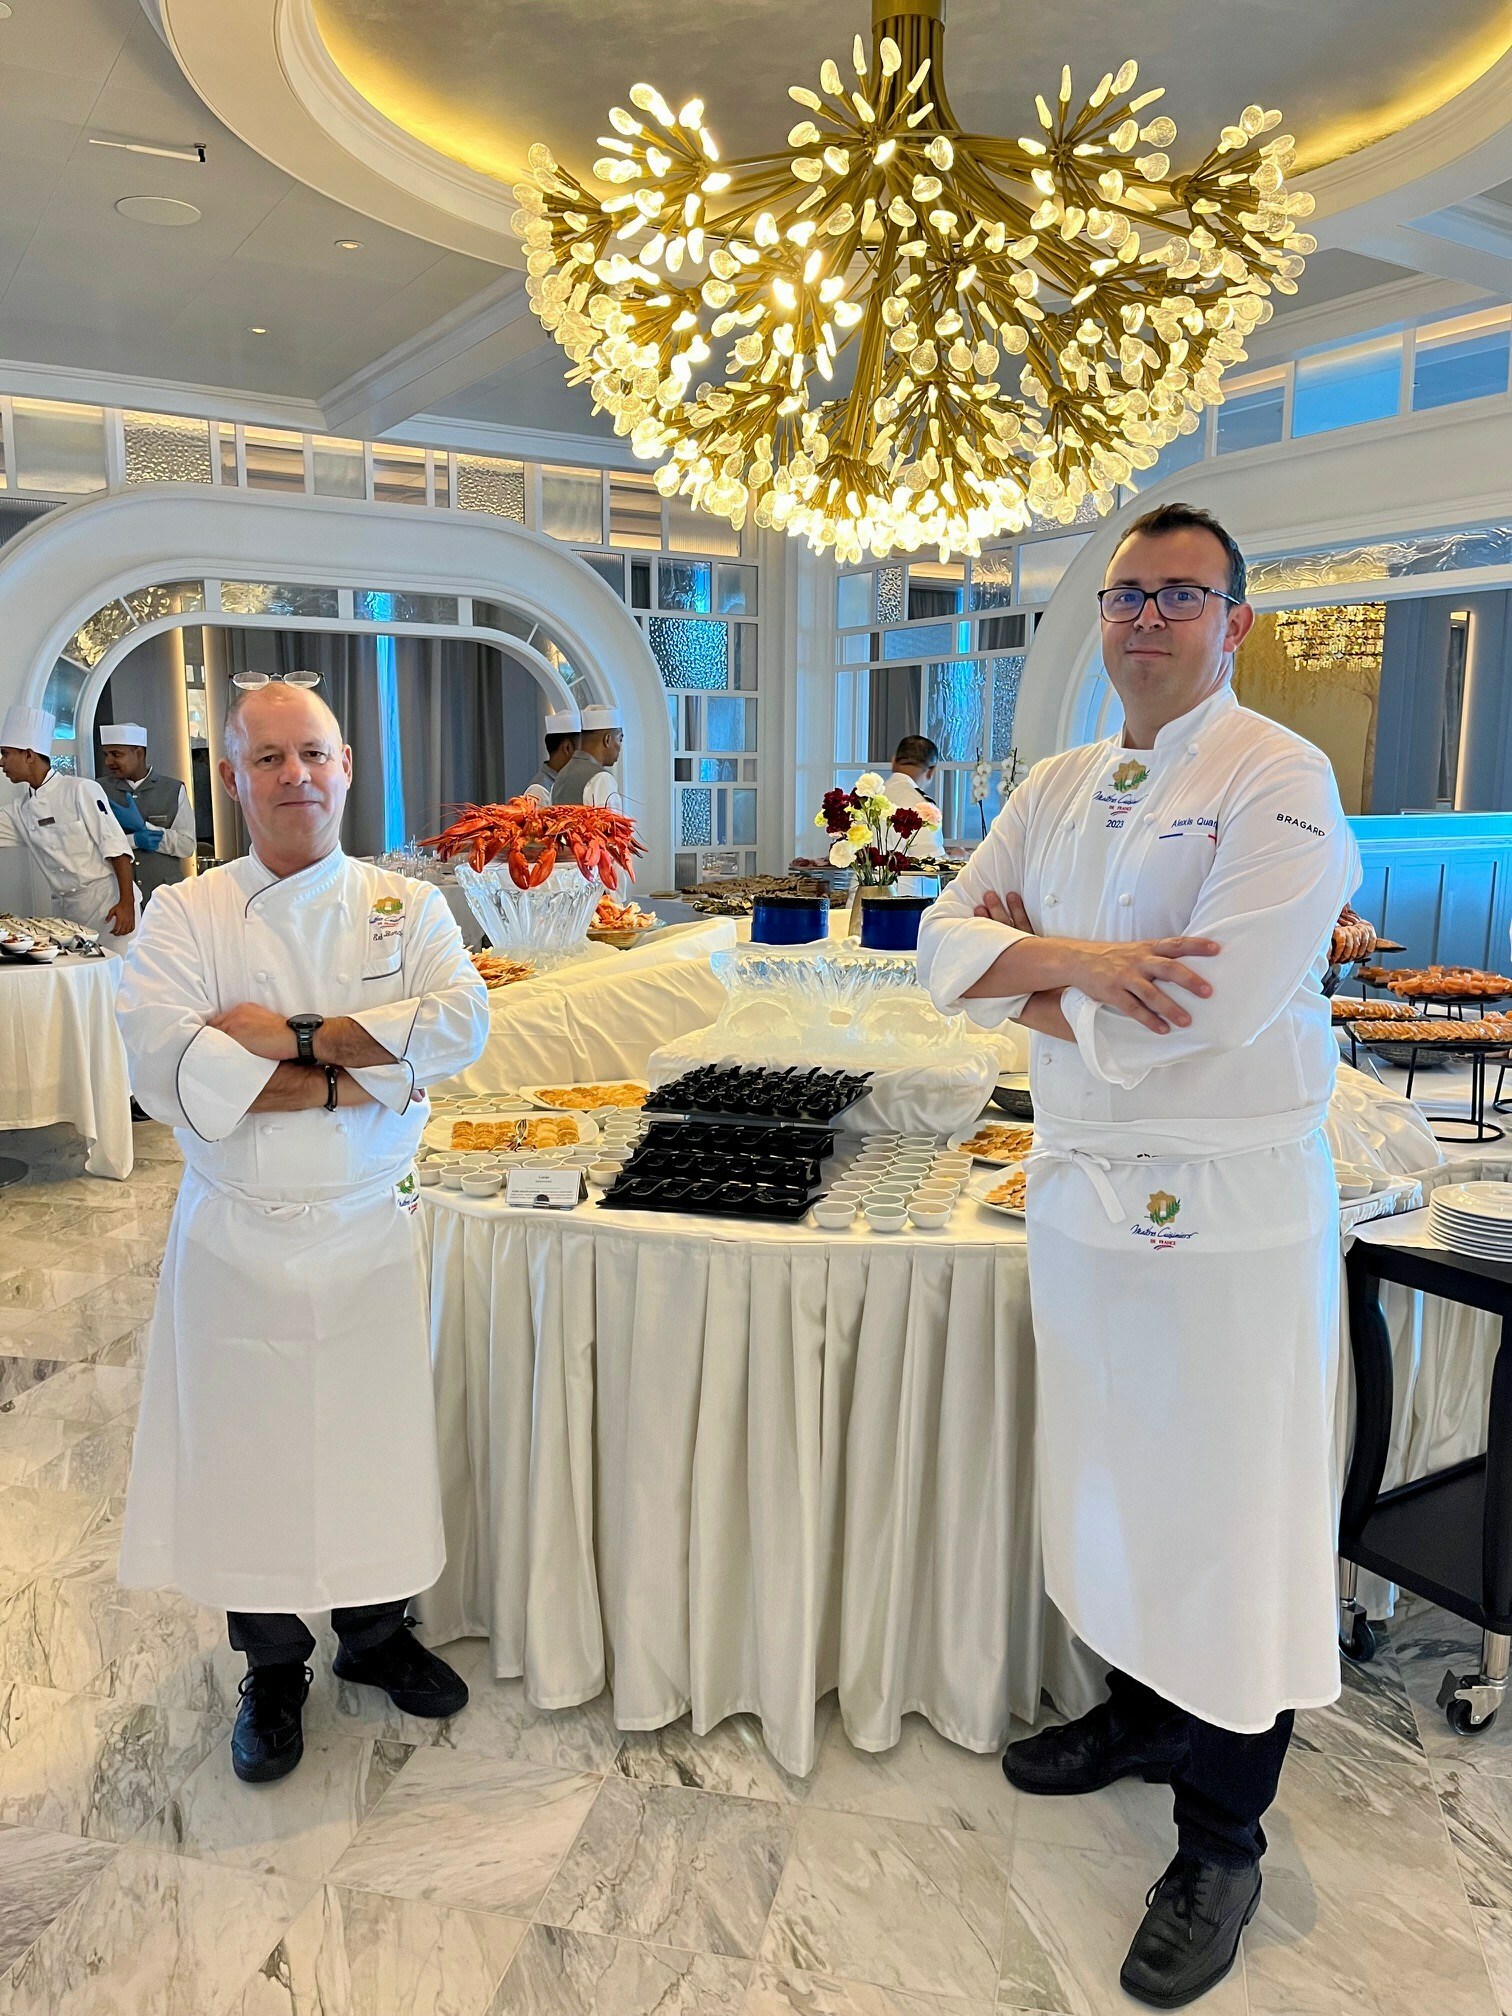 Chef Eric Barale and Chef Alexis Quaretti During Brunch Service in The Grand Dining Room on board Oceania Cruises’ newest ship, Vista (Image at LateCruiseNews.com - May 2023)